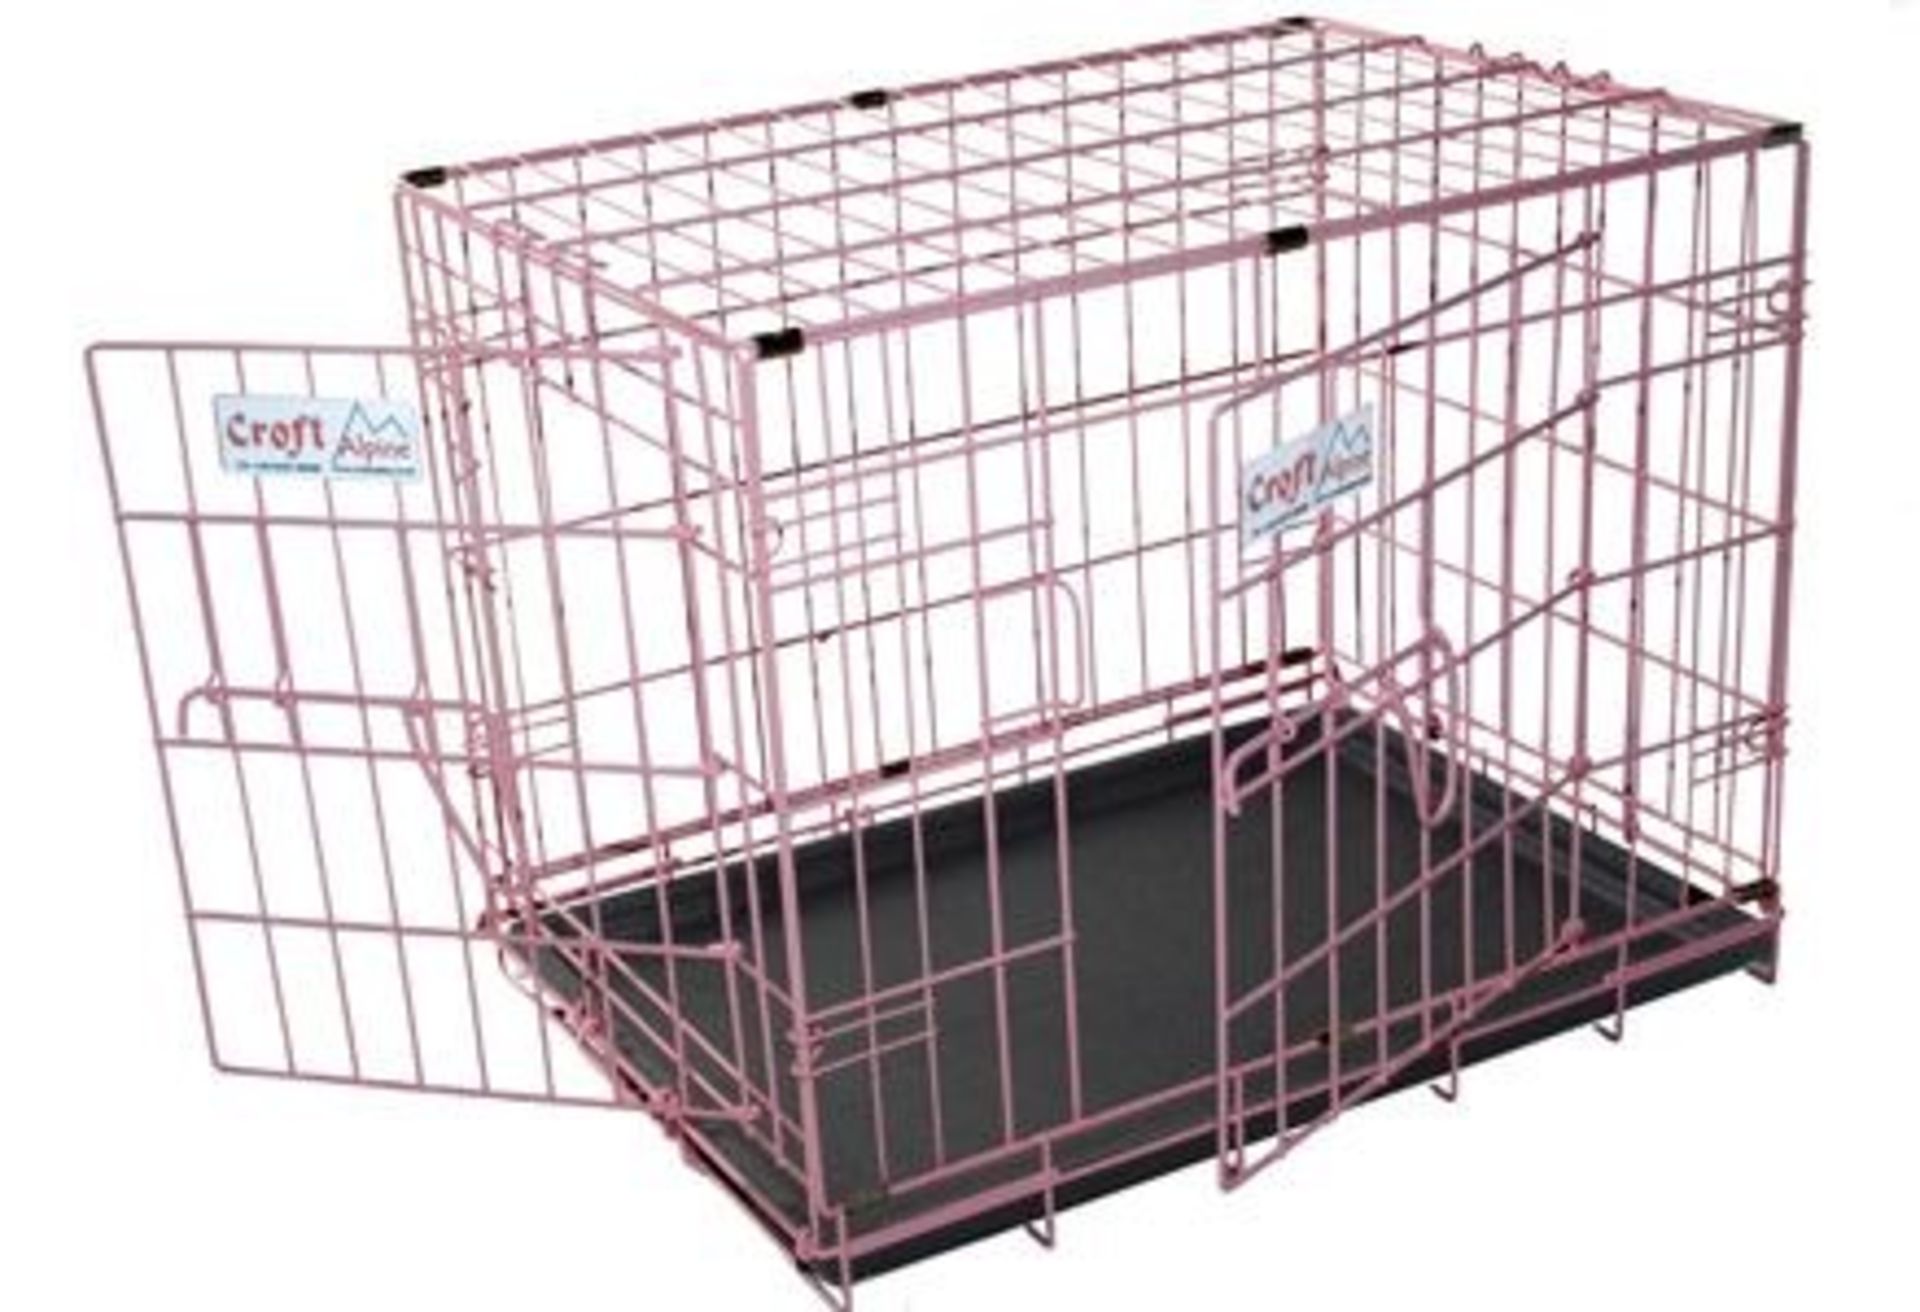 16 x Alpine Wire Dog Crates 36" | Total RRP £592.00